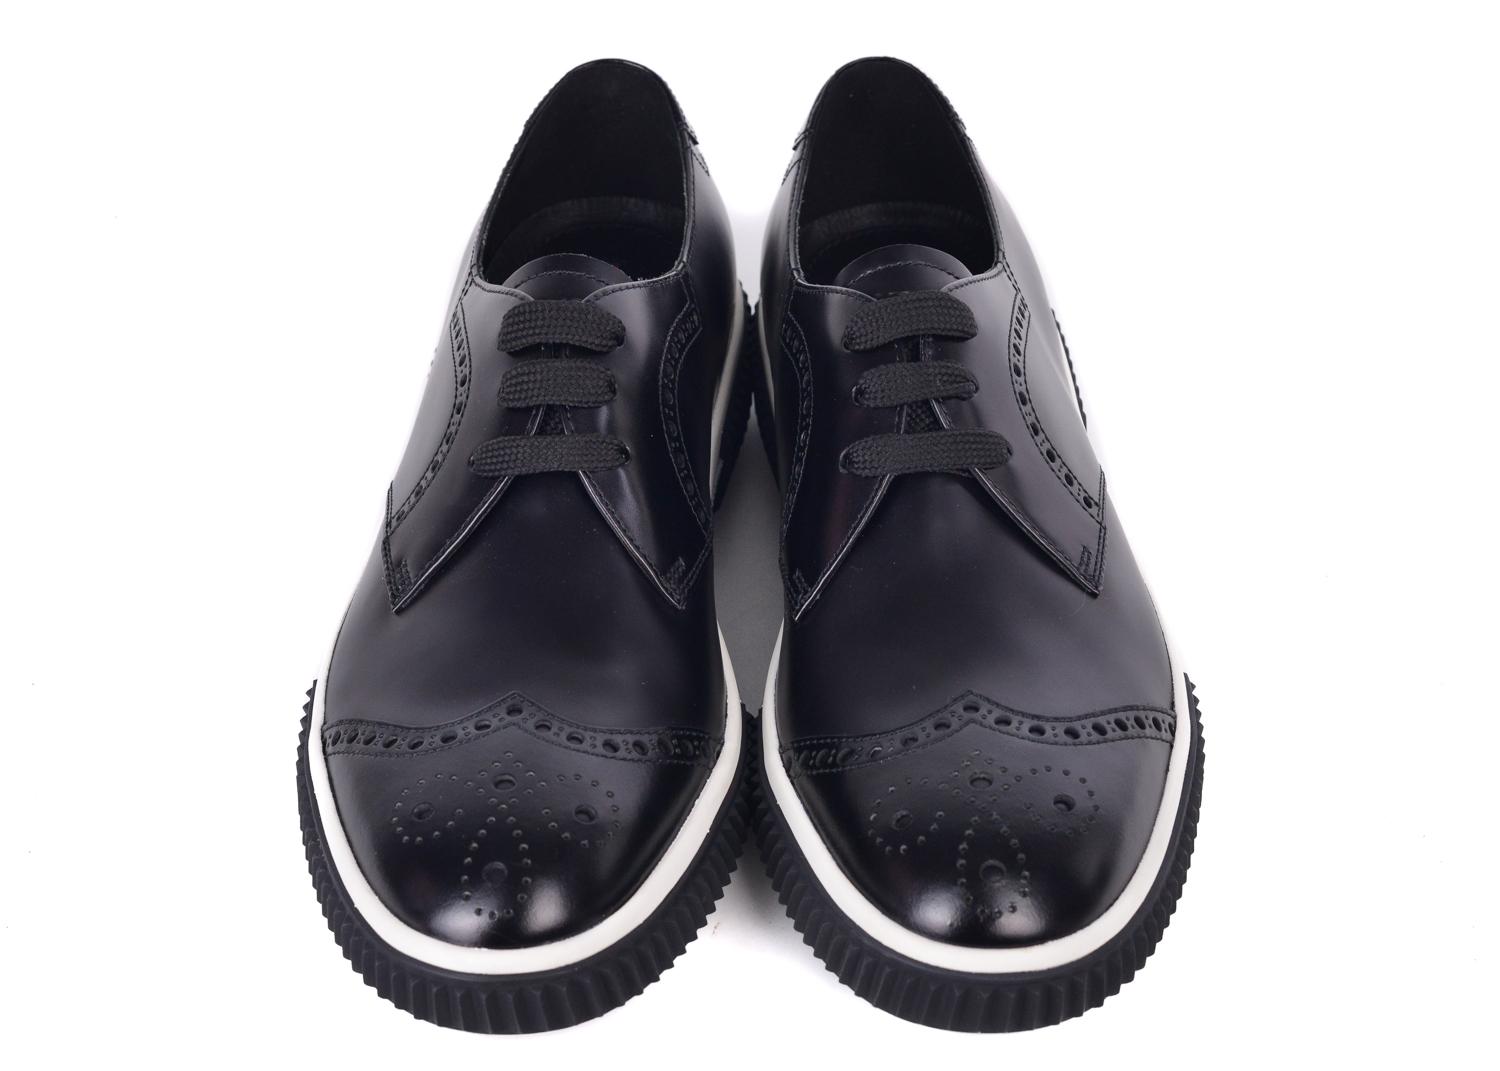 Prada lace up oxfords are perfect for that casual day  or night. This oxford features leather upper and rubber sole. These oxfords can be paired with an all dark denim outfit and a white turtleneck for the perfect autumnal feel

Linea Rossa Brushed